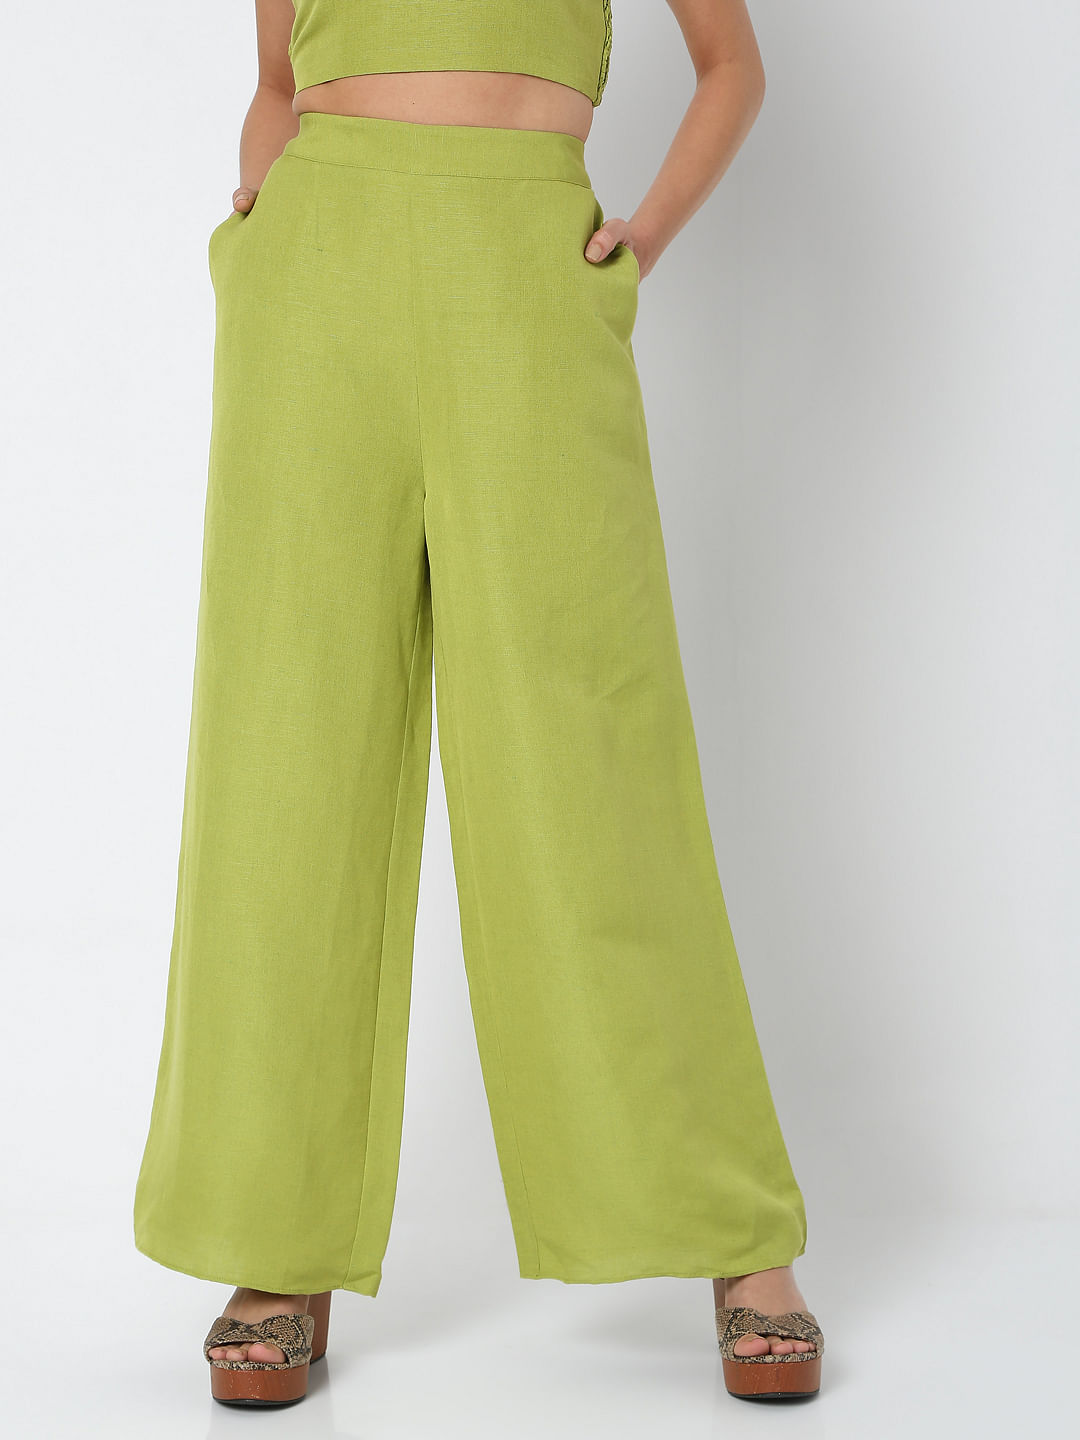 PLEATED FITTED CROP TOP  FLARED TROUSERS COORD SET  GREEN  Miss Guilty